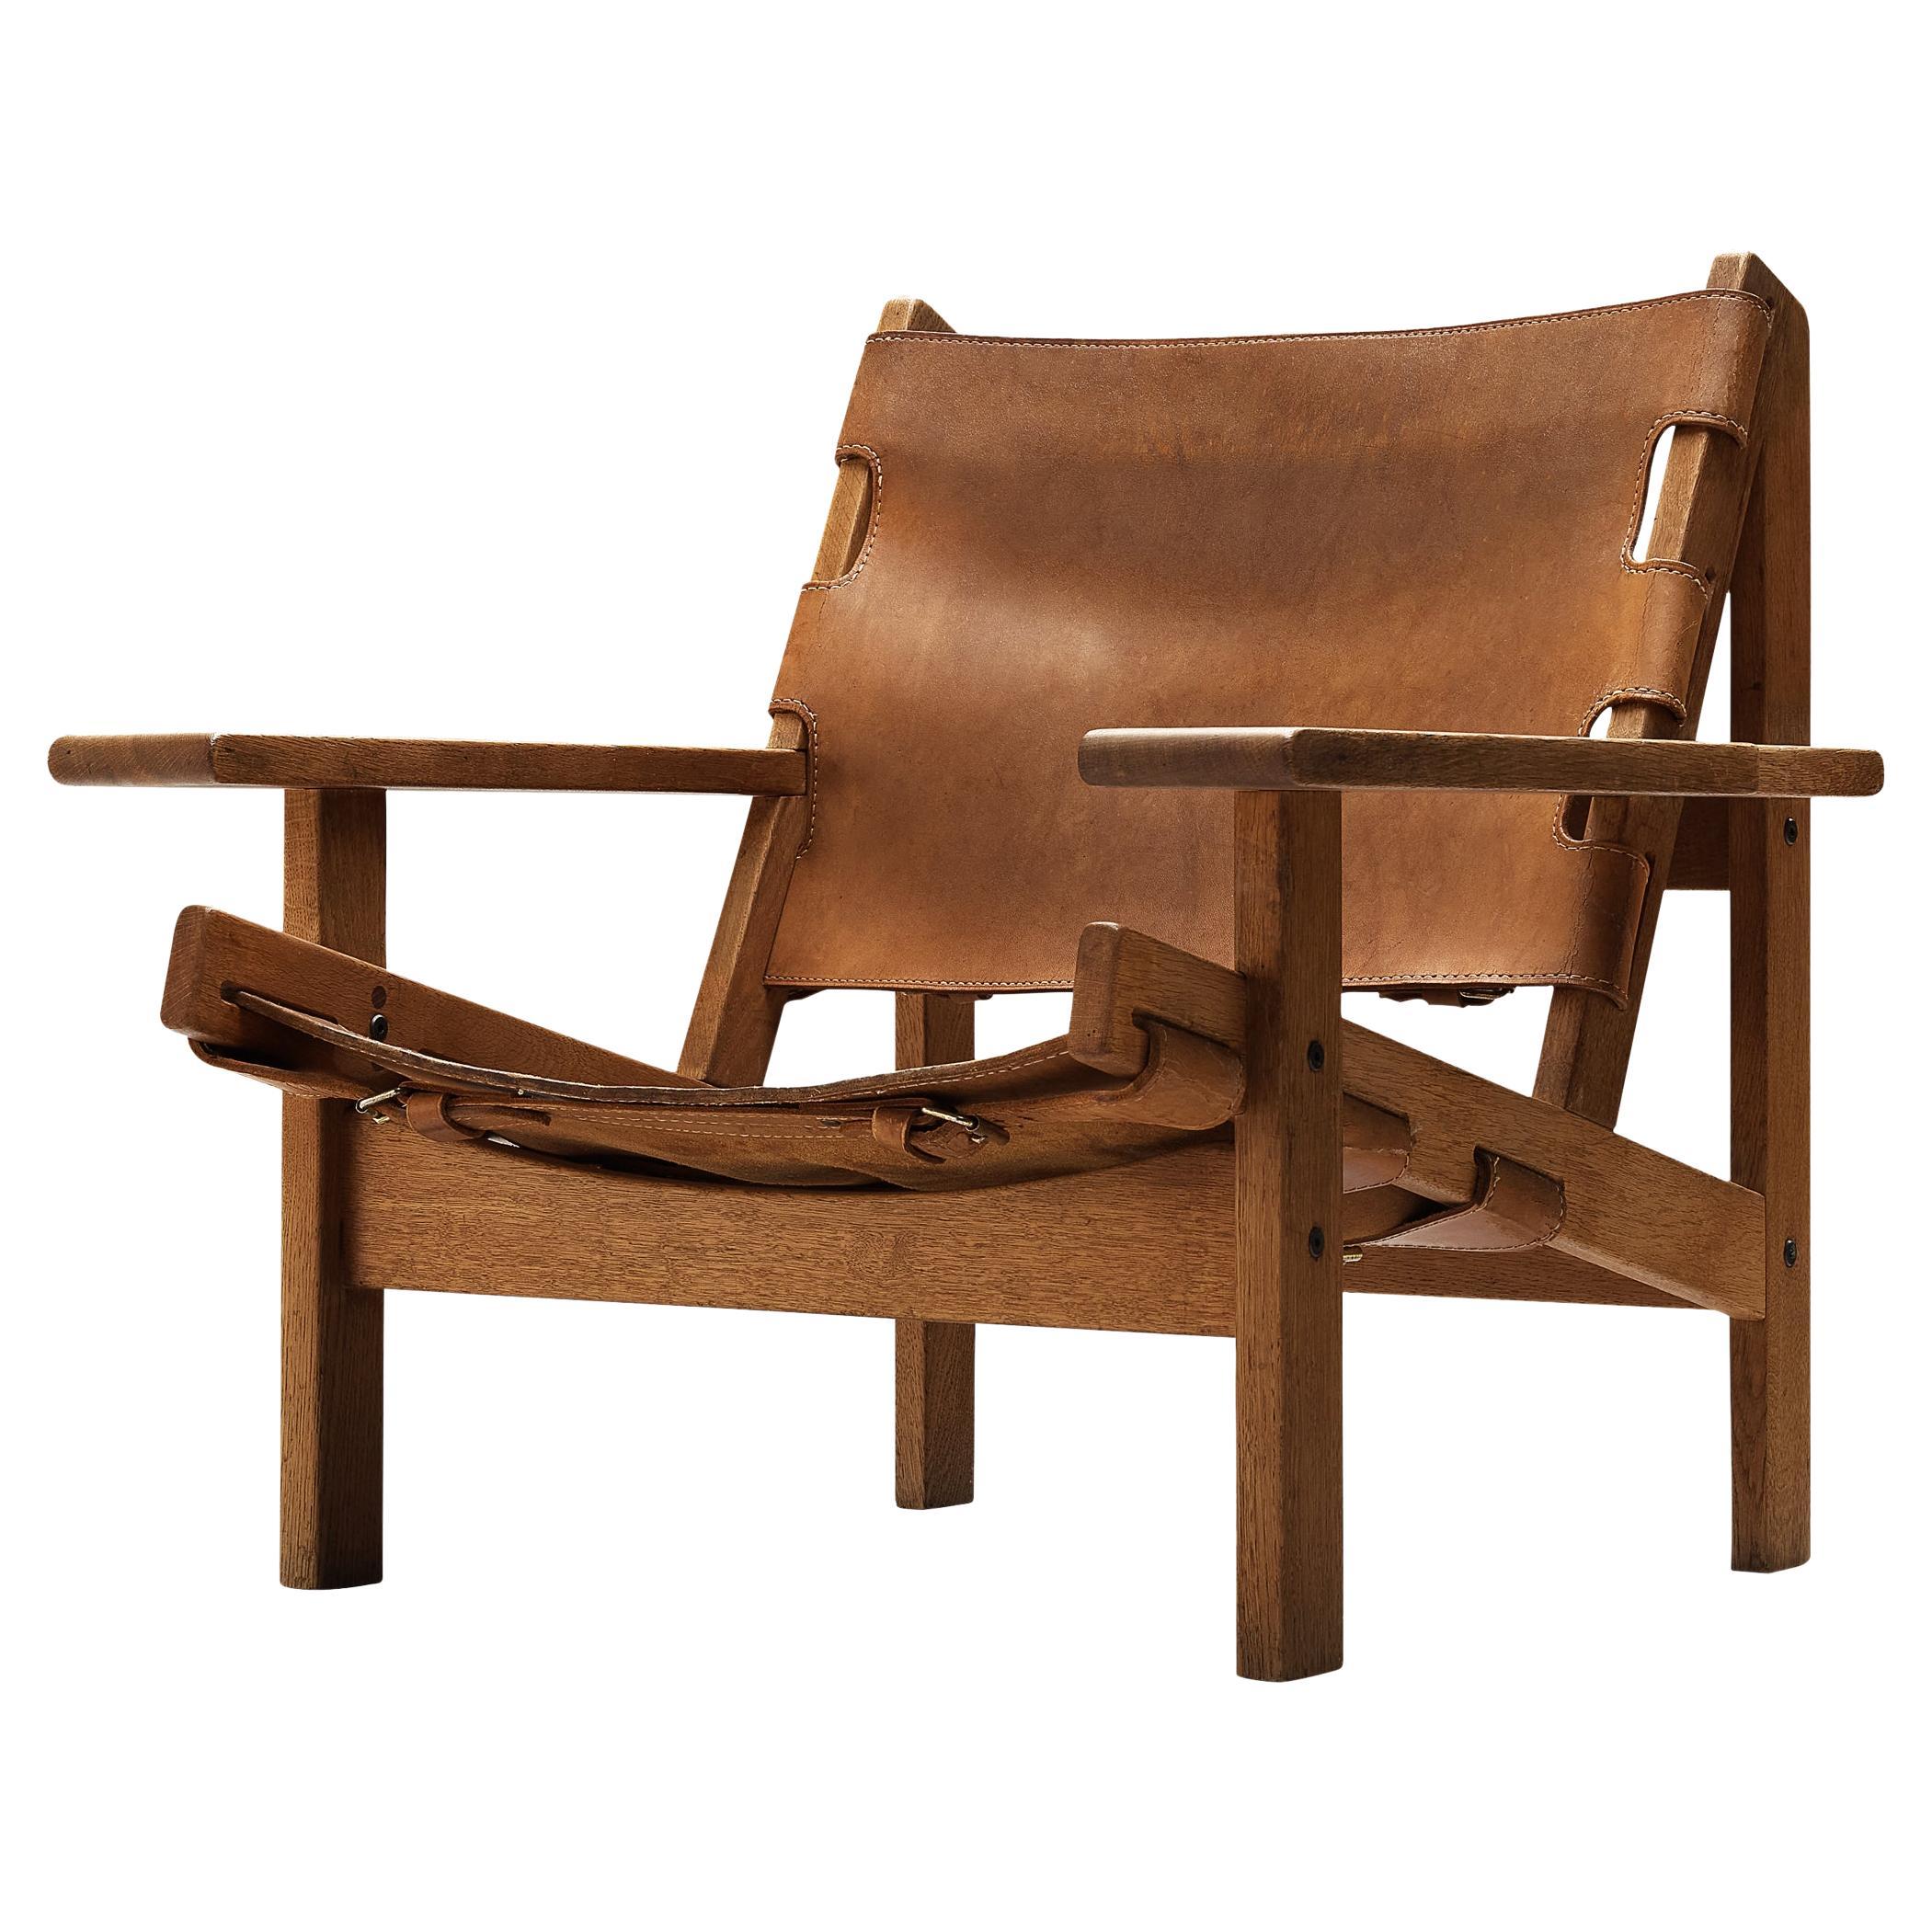  Kurt Østervig 'Hunting' Lounge Chair in Cognac Leather and Oak  For Sale